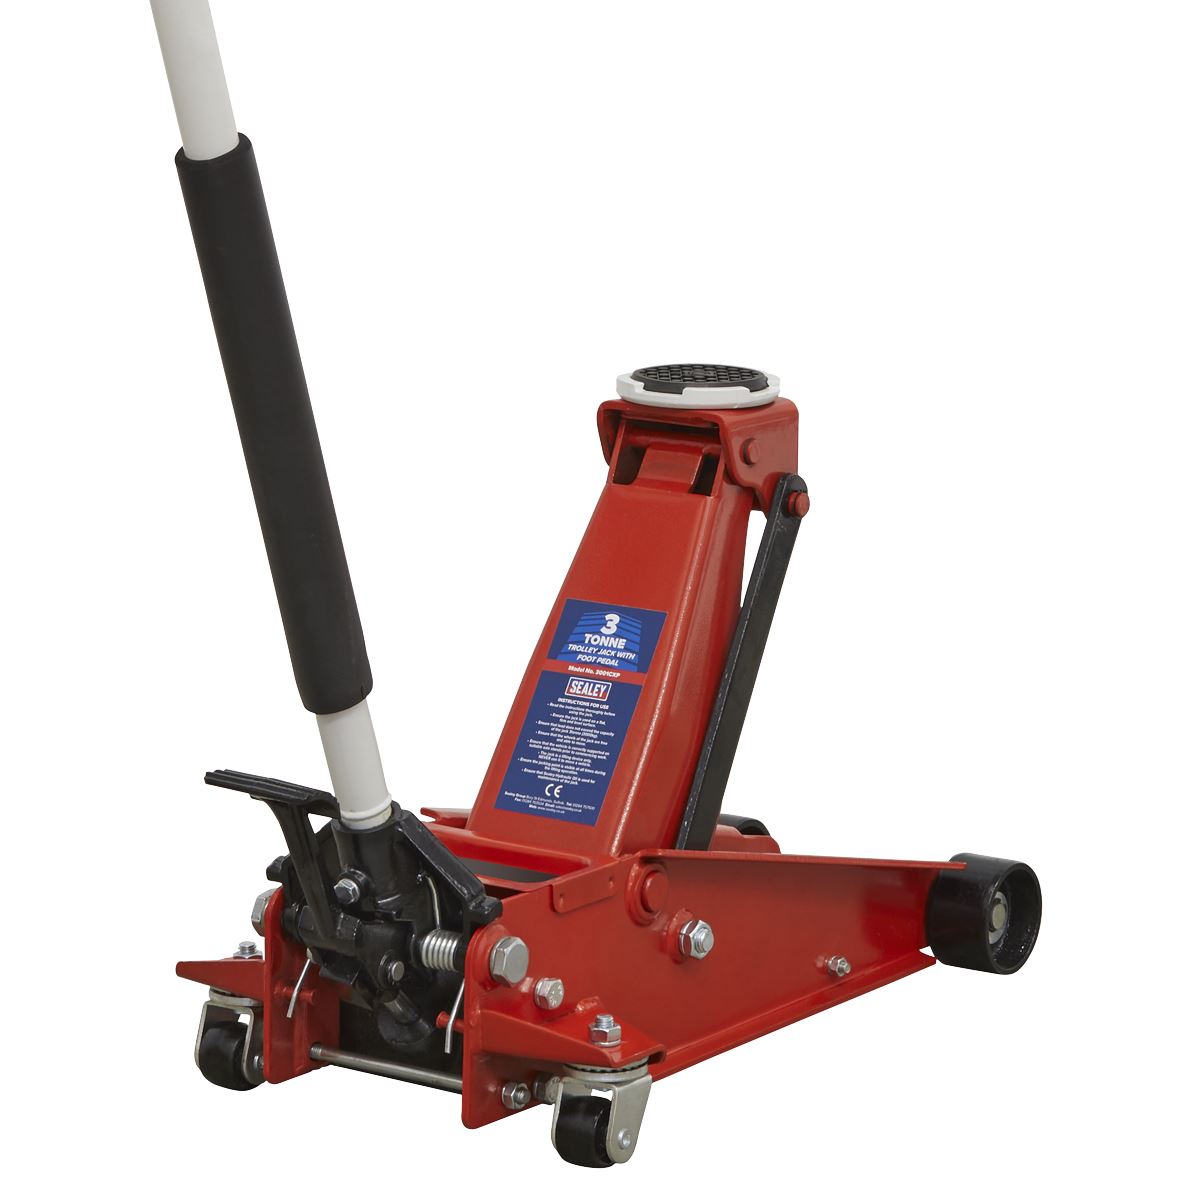 Sealey Trolley Jack with Foot Pedal 3 Tonne